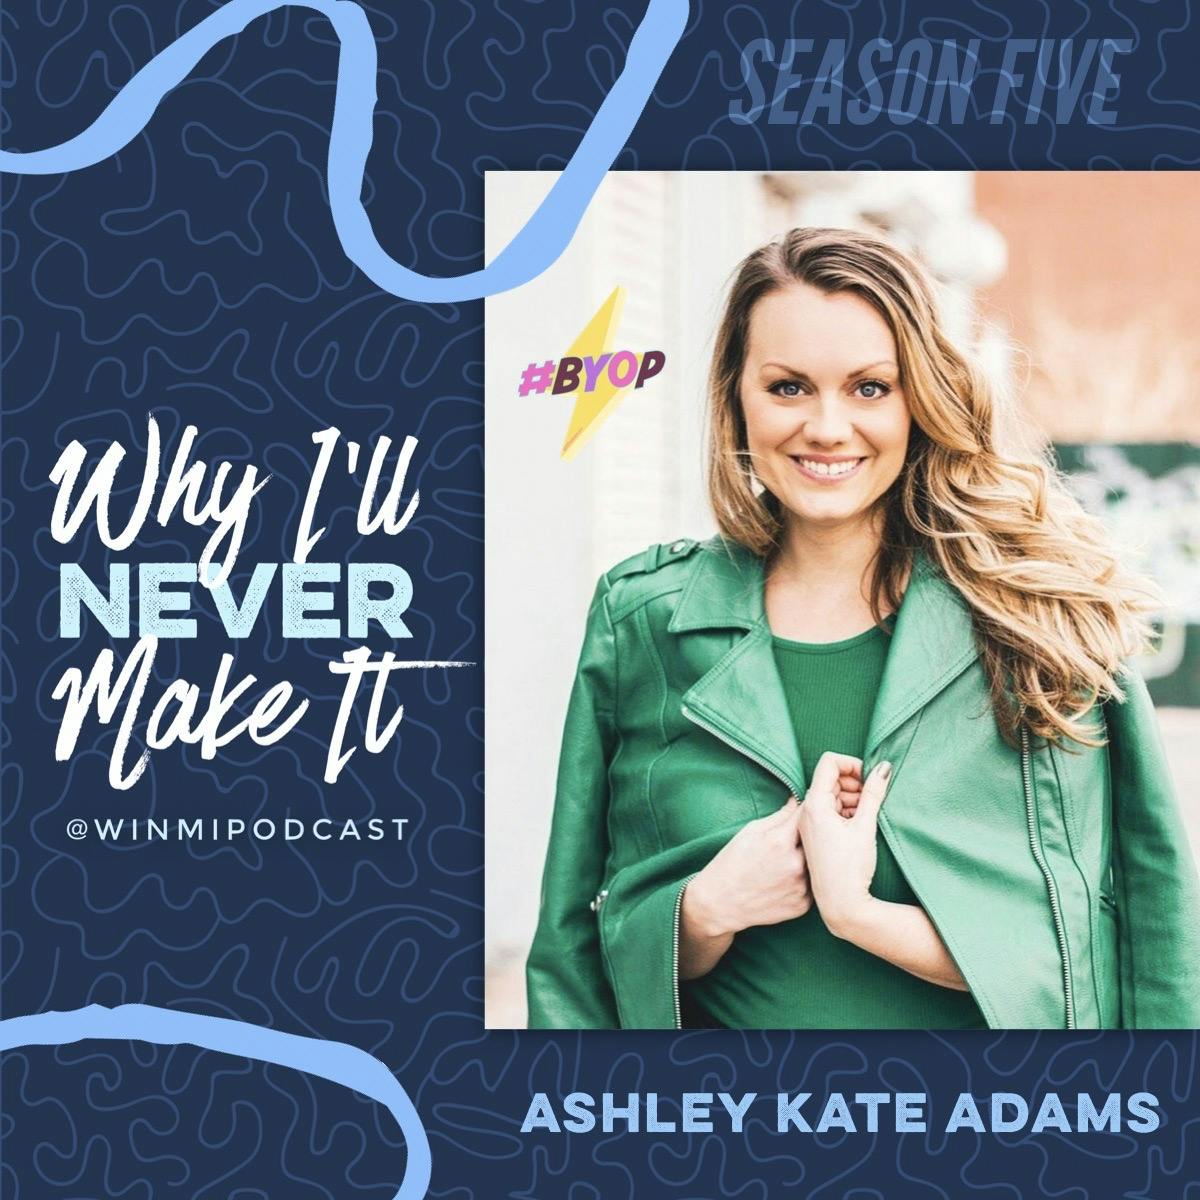 Ashley Kate Adams - Broadway Actress Who Learned How to Be Her Own Producer